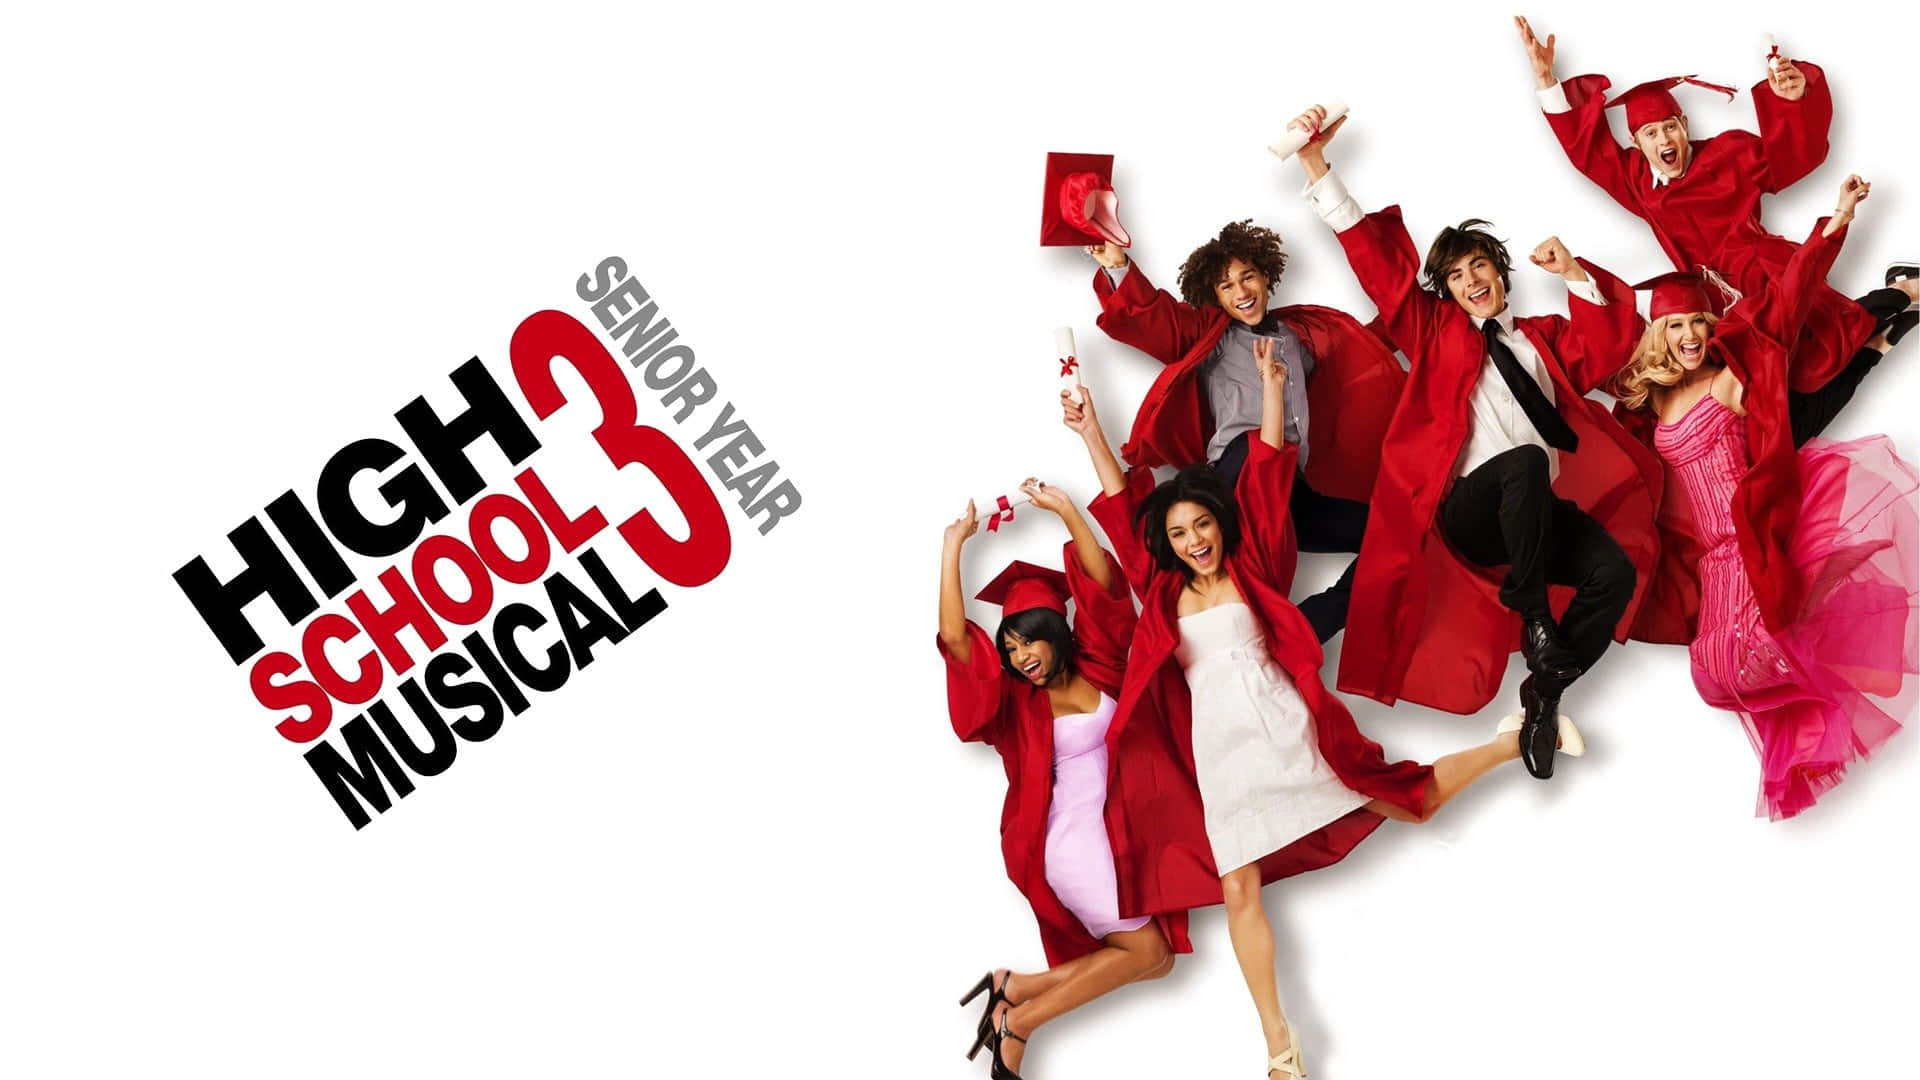 High School Musical cast posing together in a dynamic performance scene.